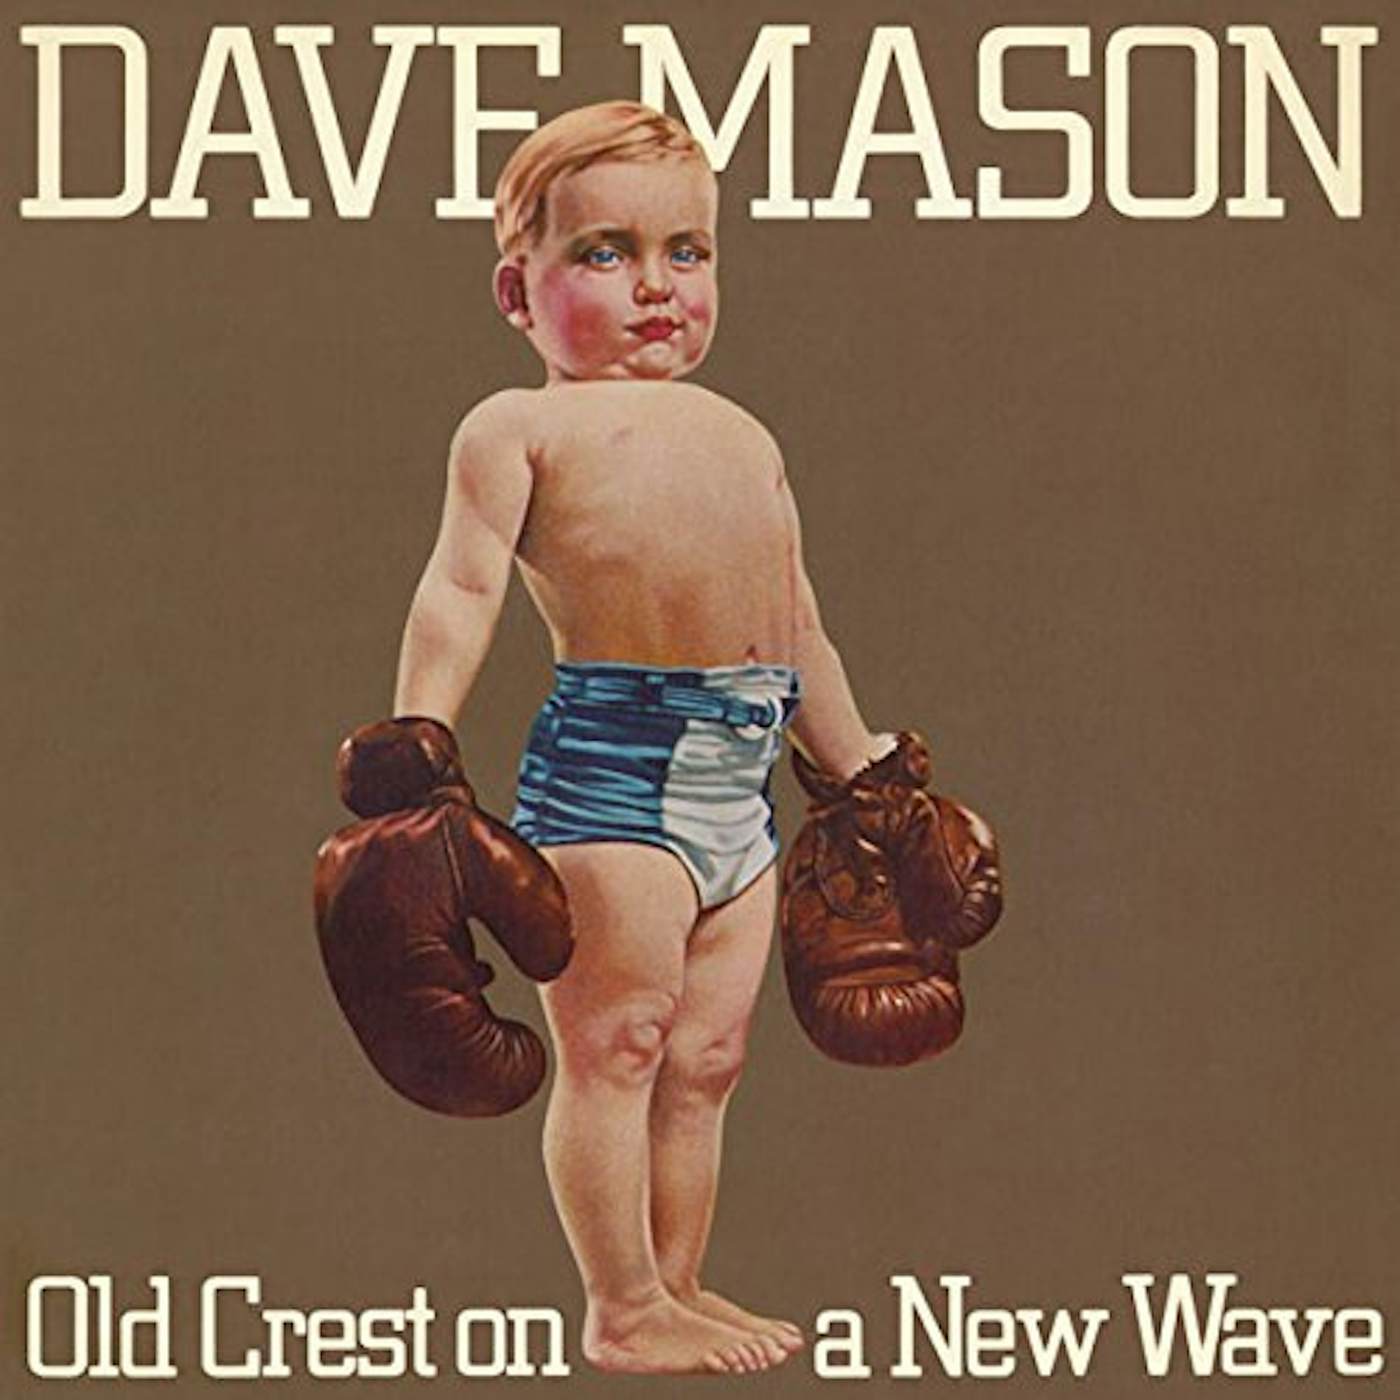 Dave Mason OLD CREST ON A NEW WAVE CD